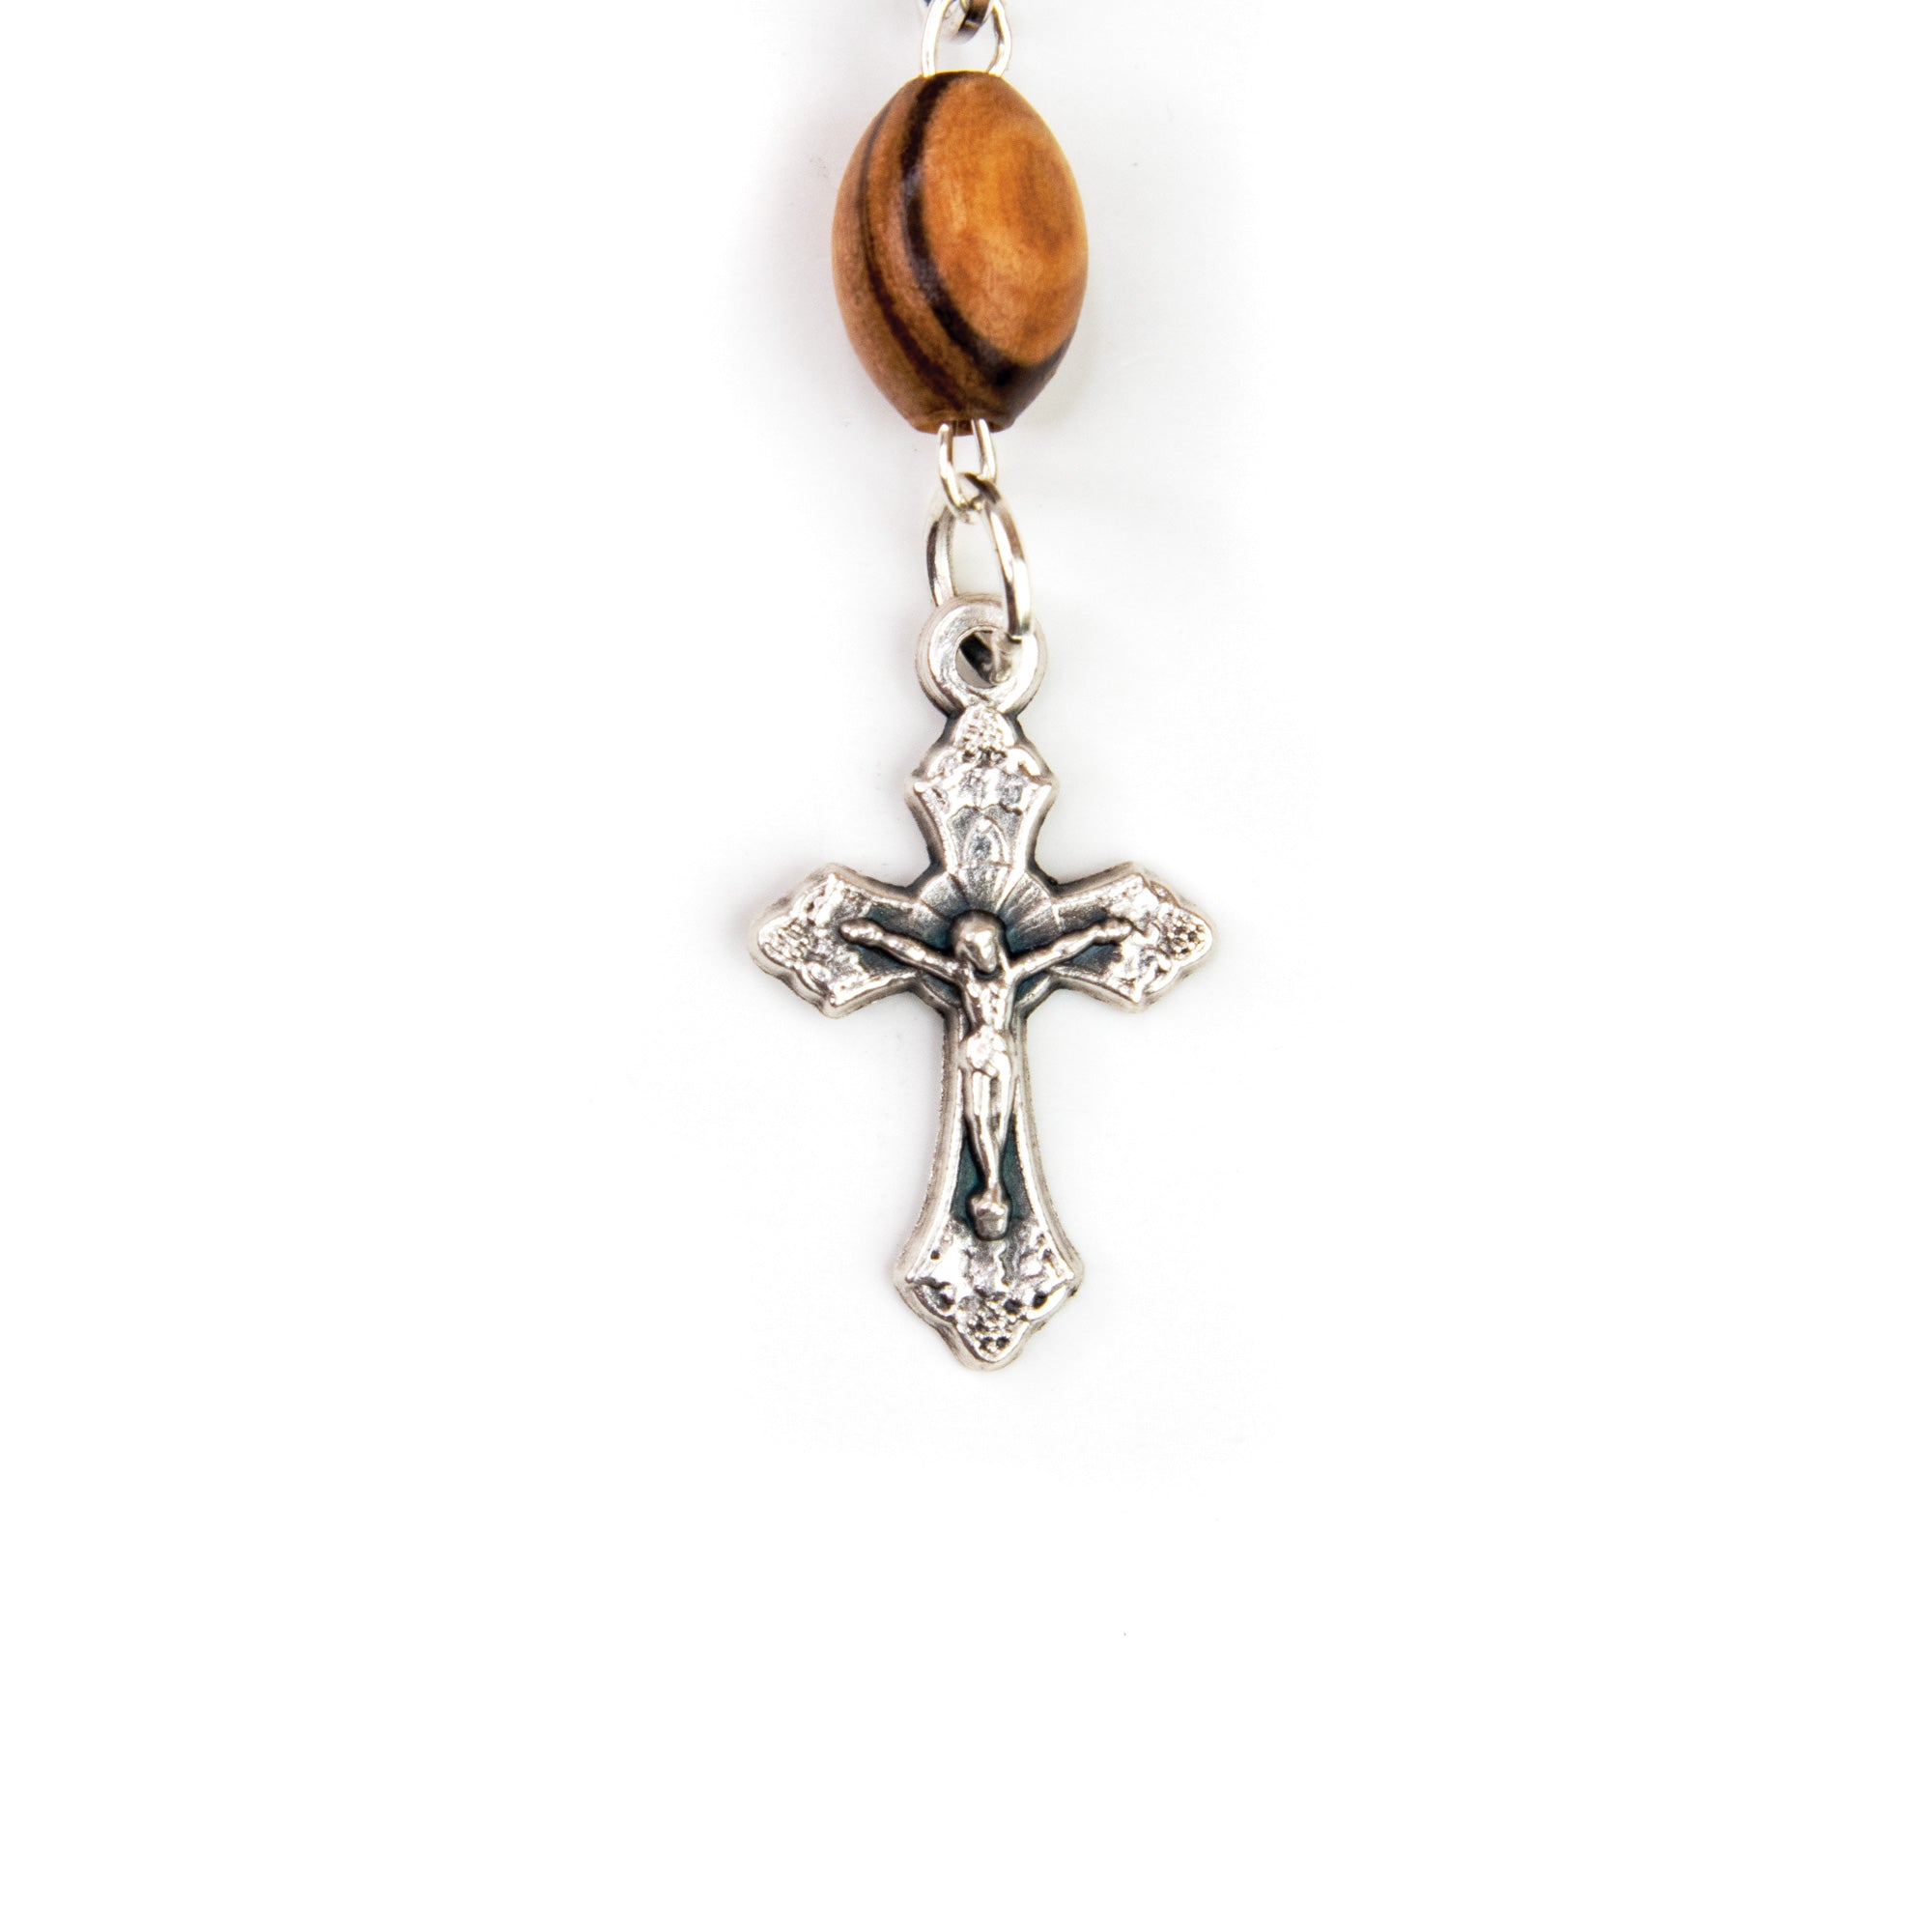 Jesus Divine Mercy, Holy Land Olive Wood Pocket Auto Rosary, Made in Bethlehem cross detail